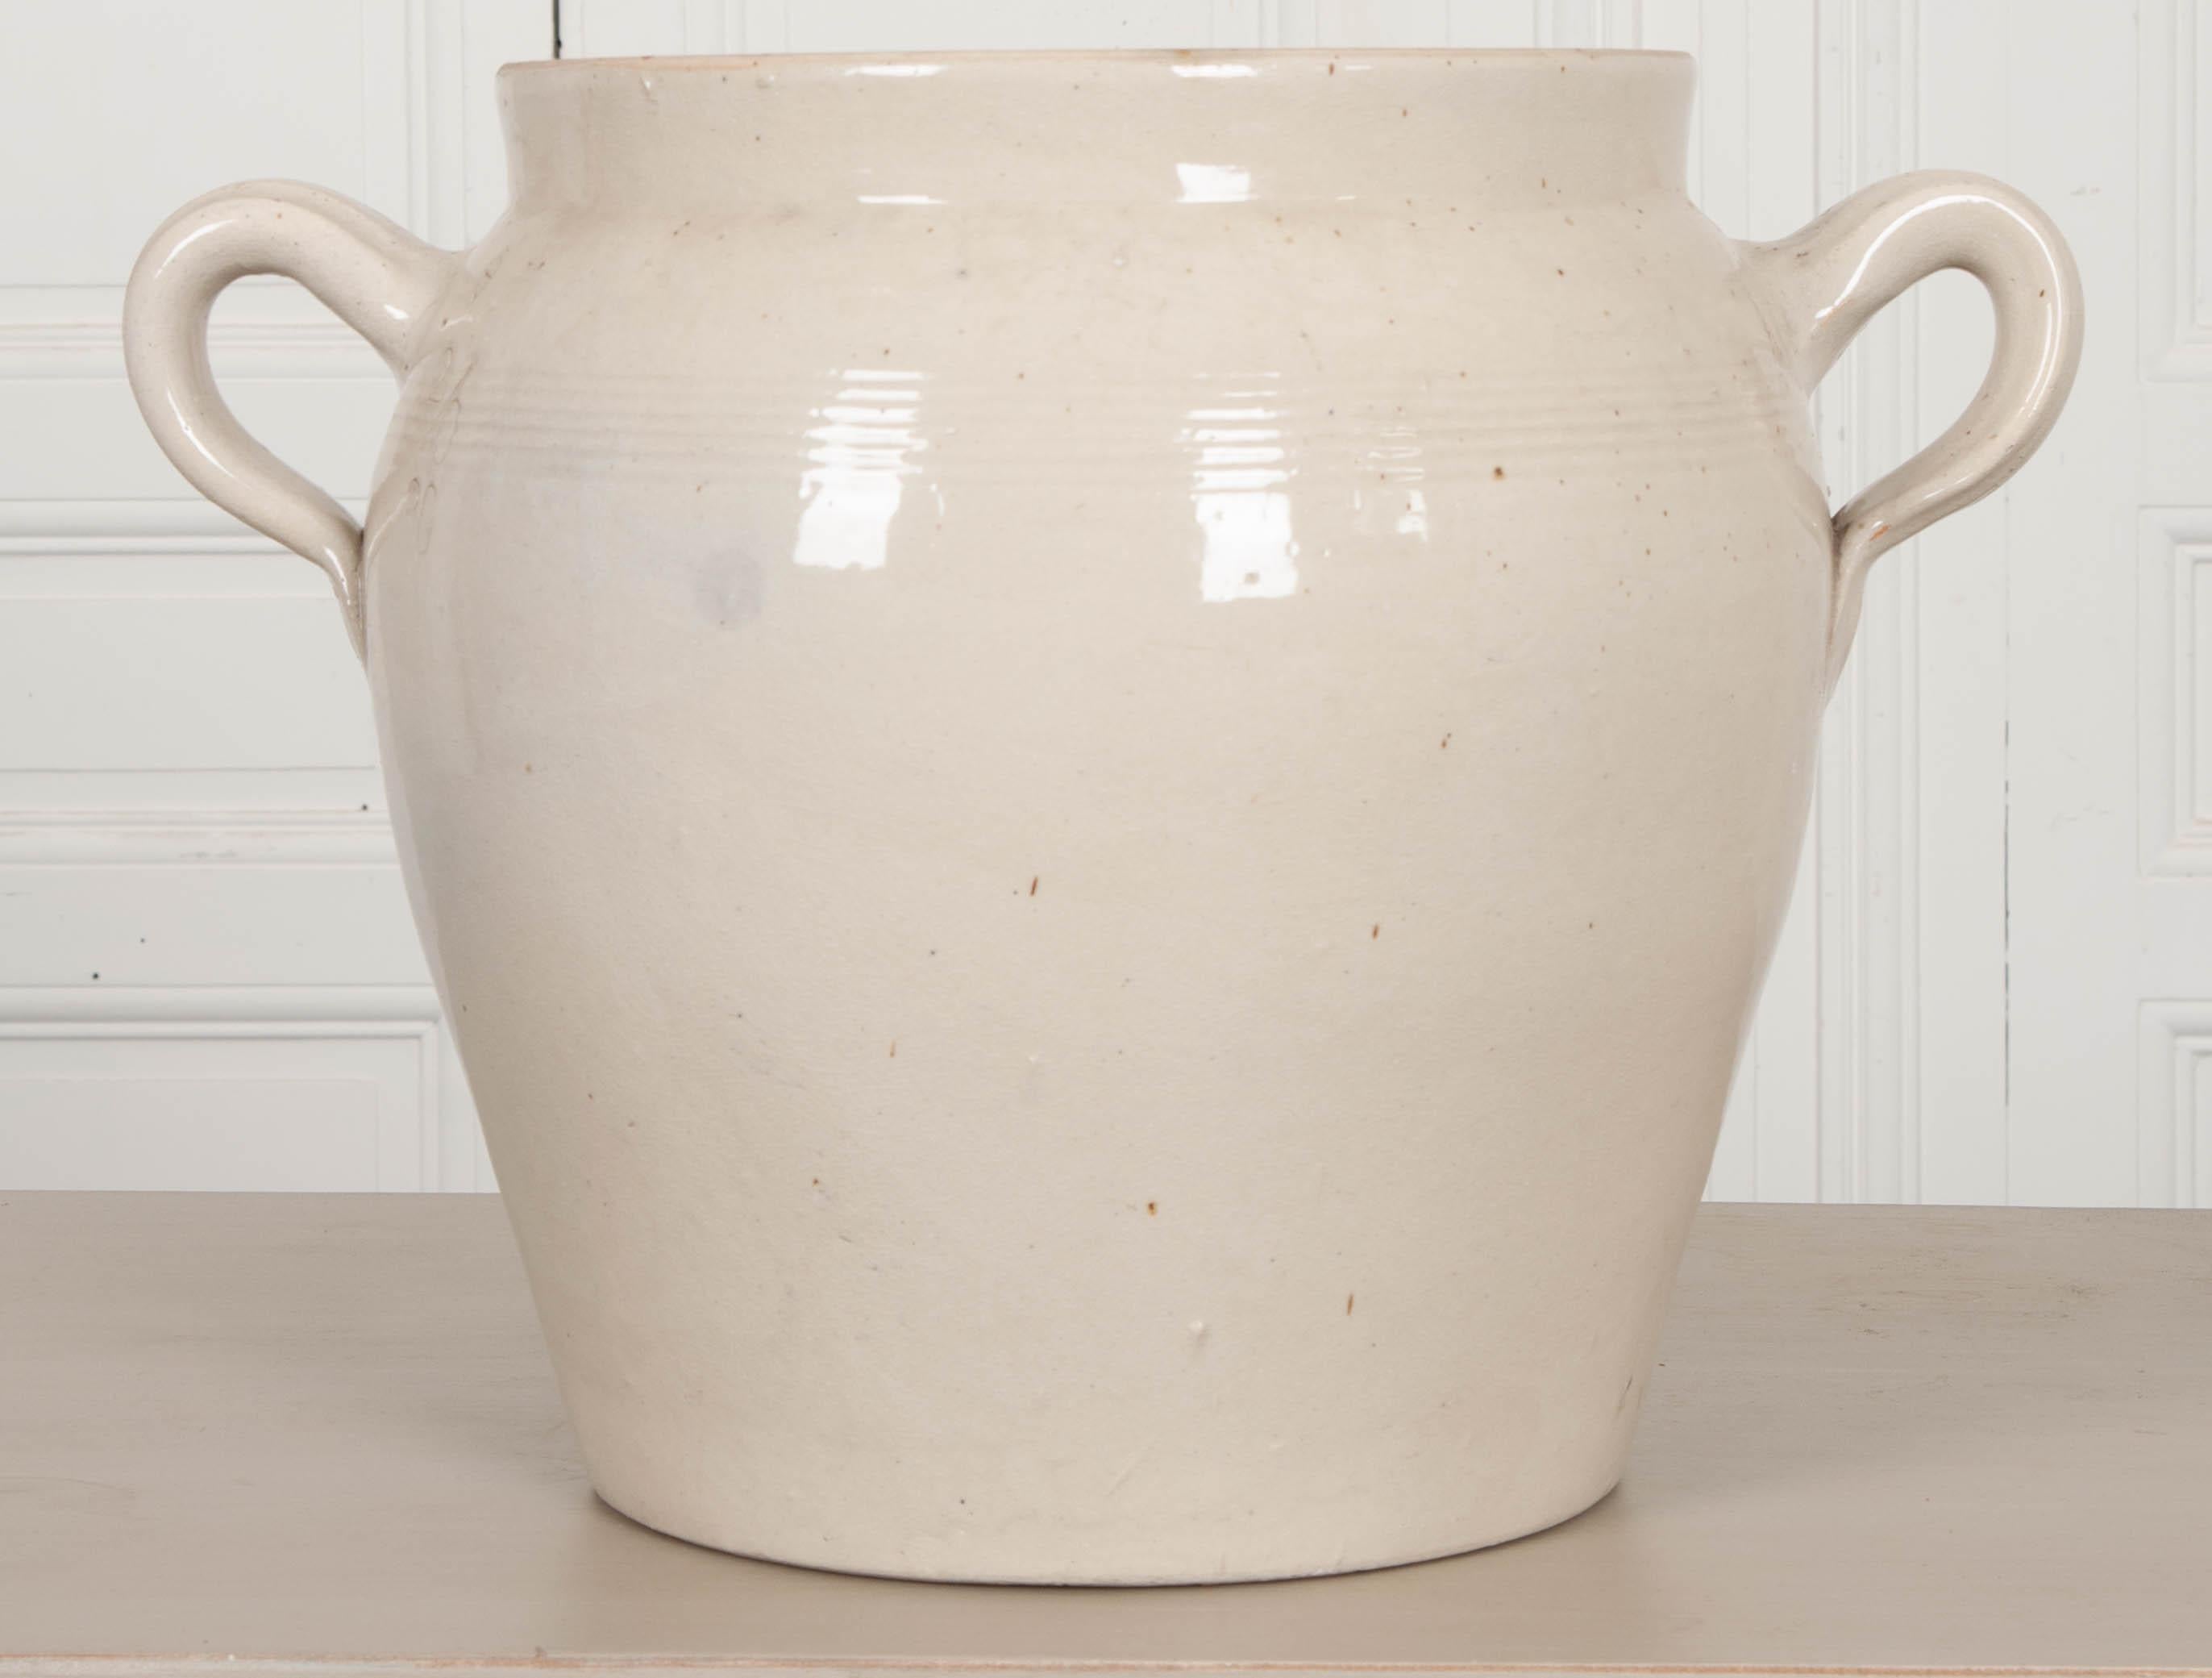 A vintage glazed earthenware crock is from France. Its looped handles make lifting the pot a little easier, and the decorative banding found between them gives it a distinct style. Every ceramic pot will differ slightly, as they are all thrown by